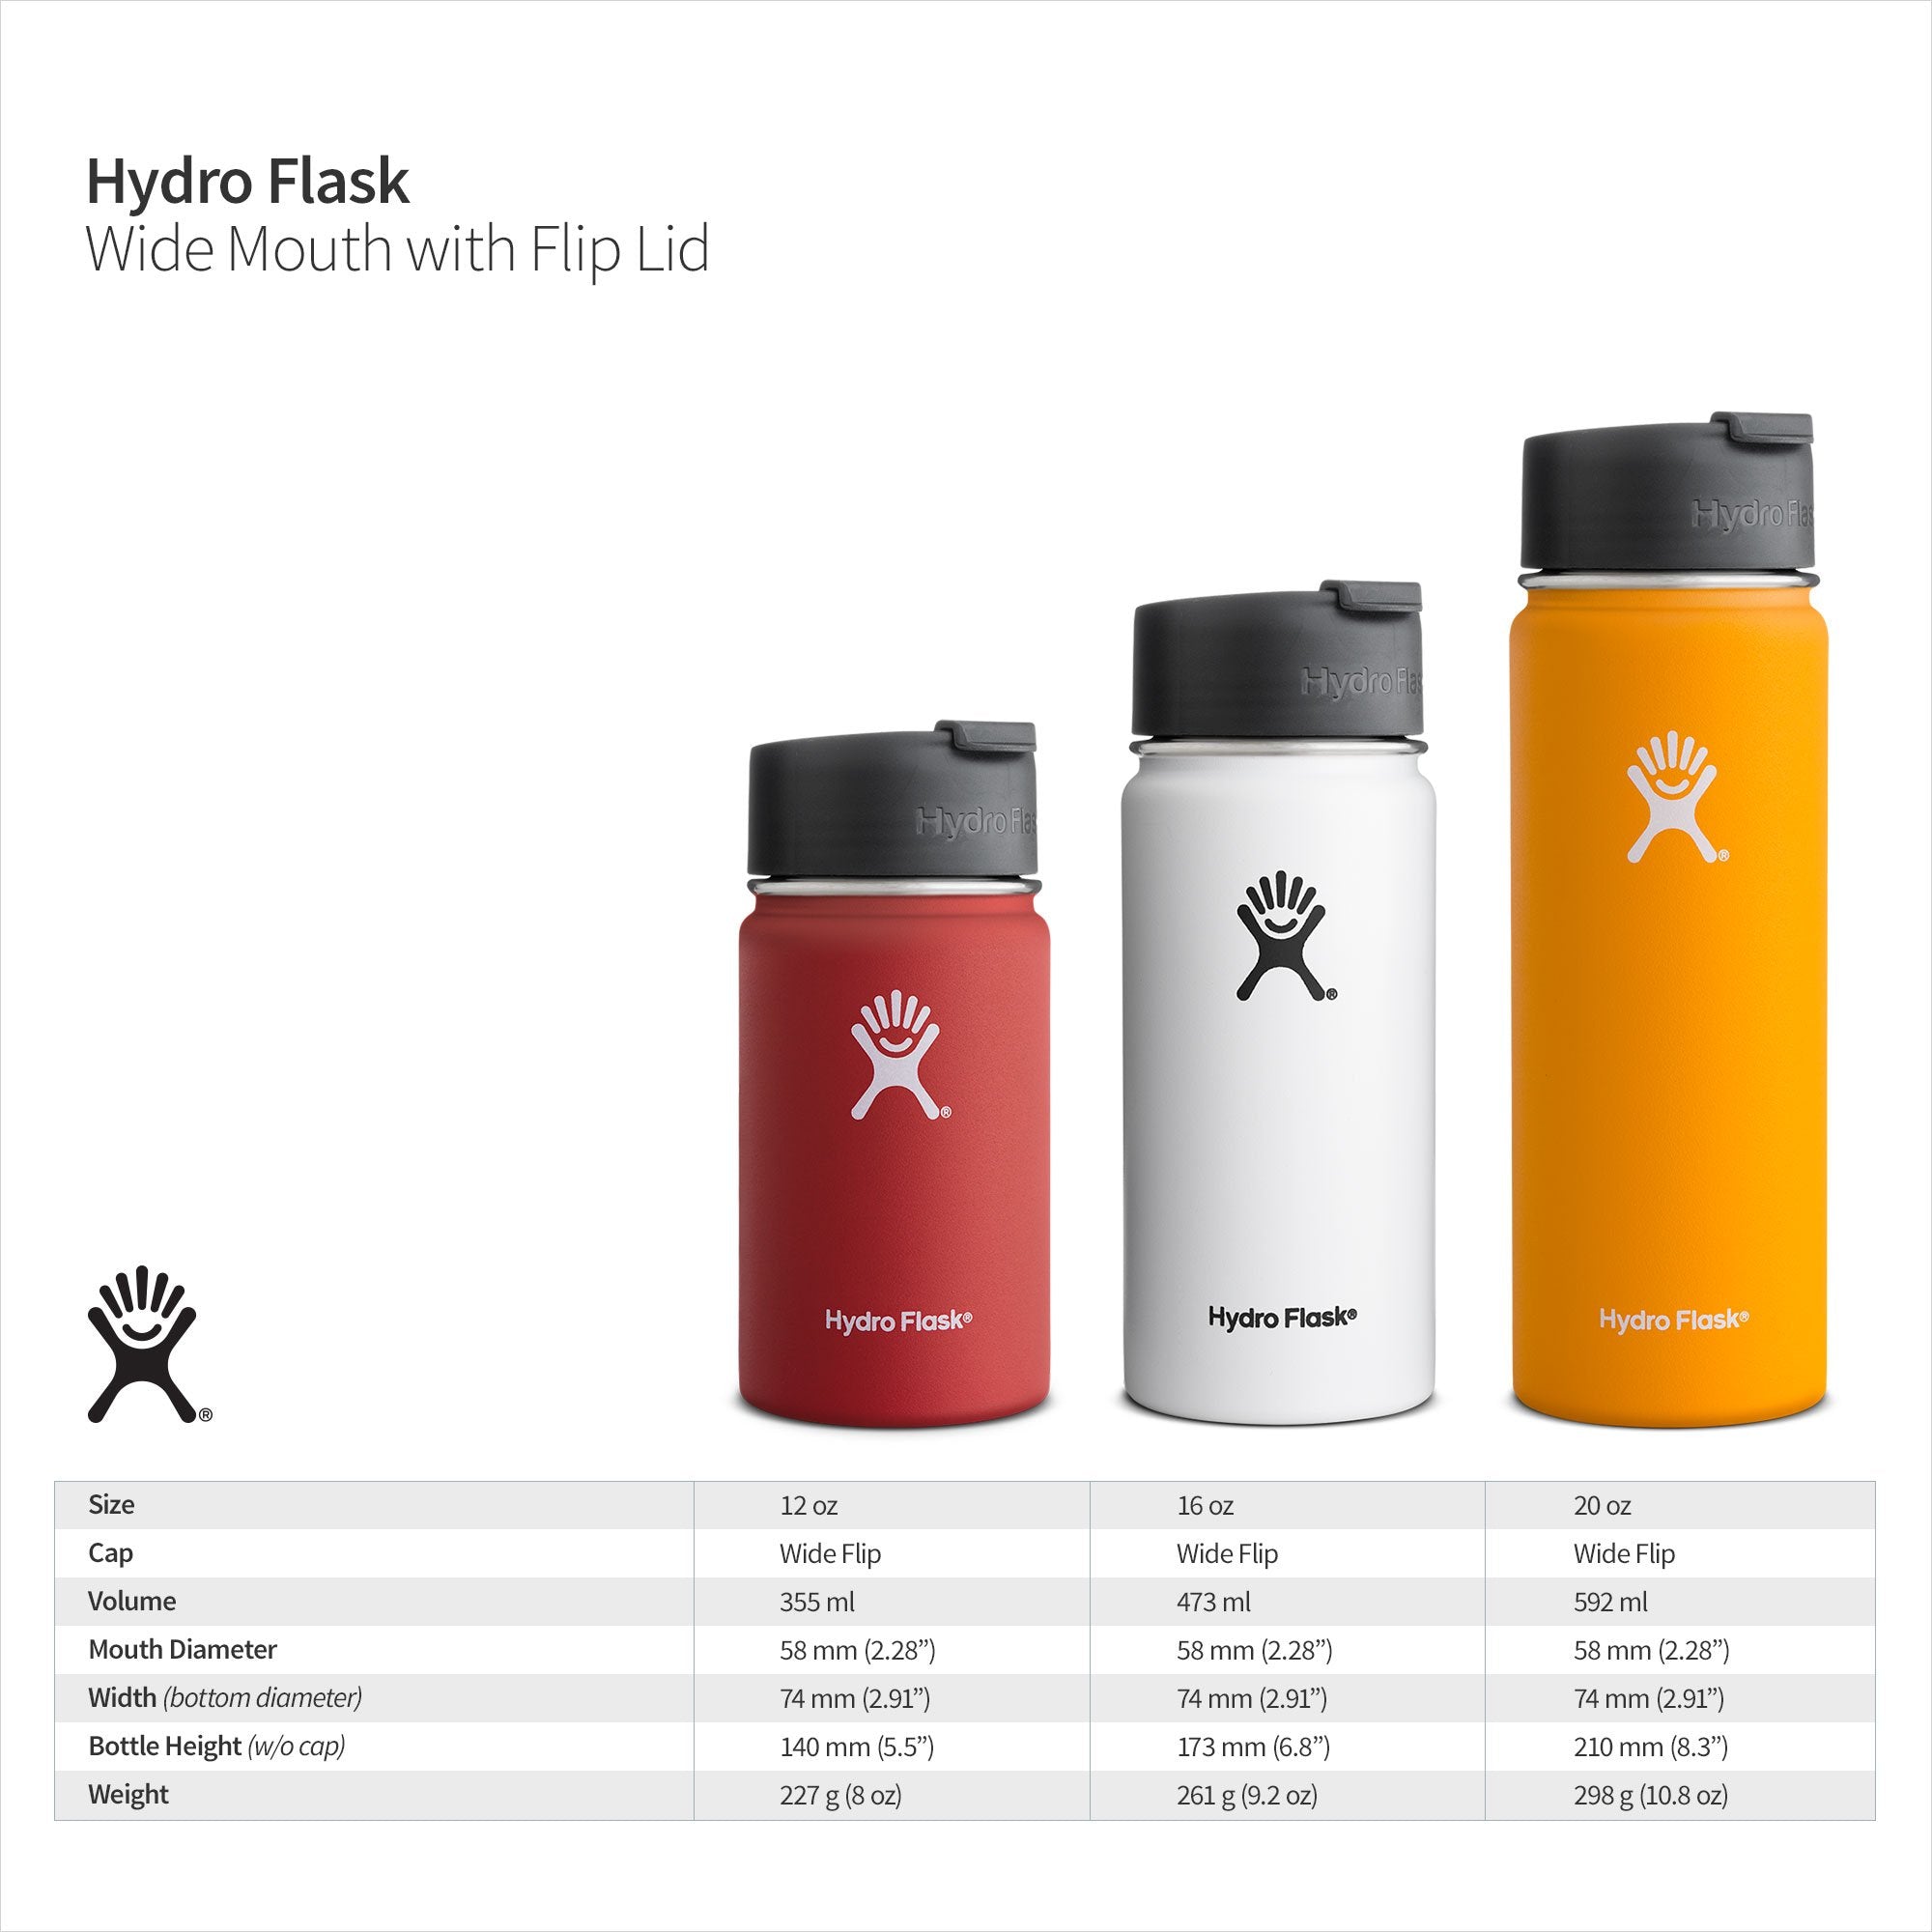  Hydro Flask 16 oz Travel Coffee Flask, Stainless Steel &  Vacuum Insulated, Wide Mouth with Hydro Flip Cap